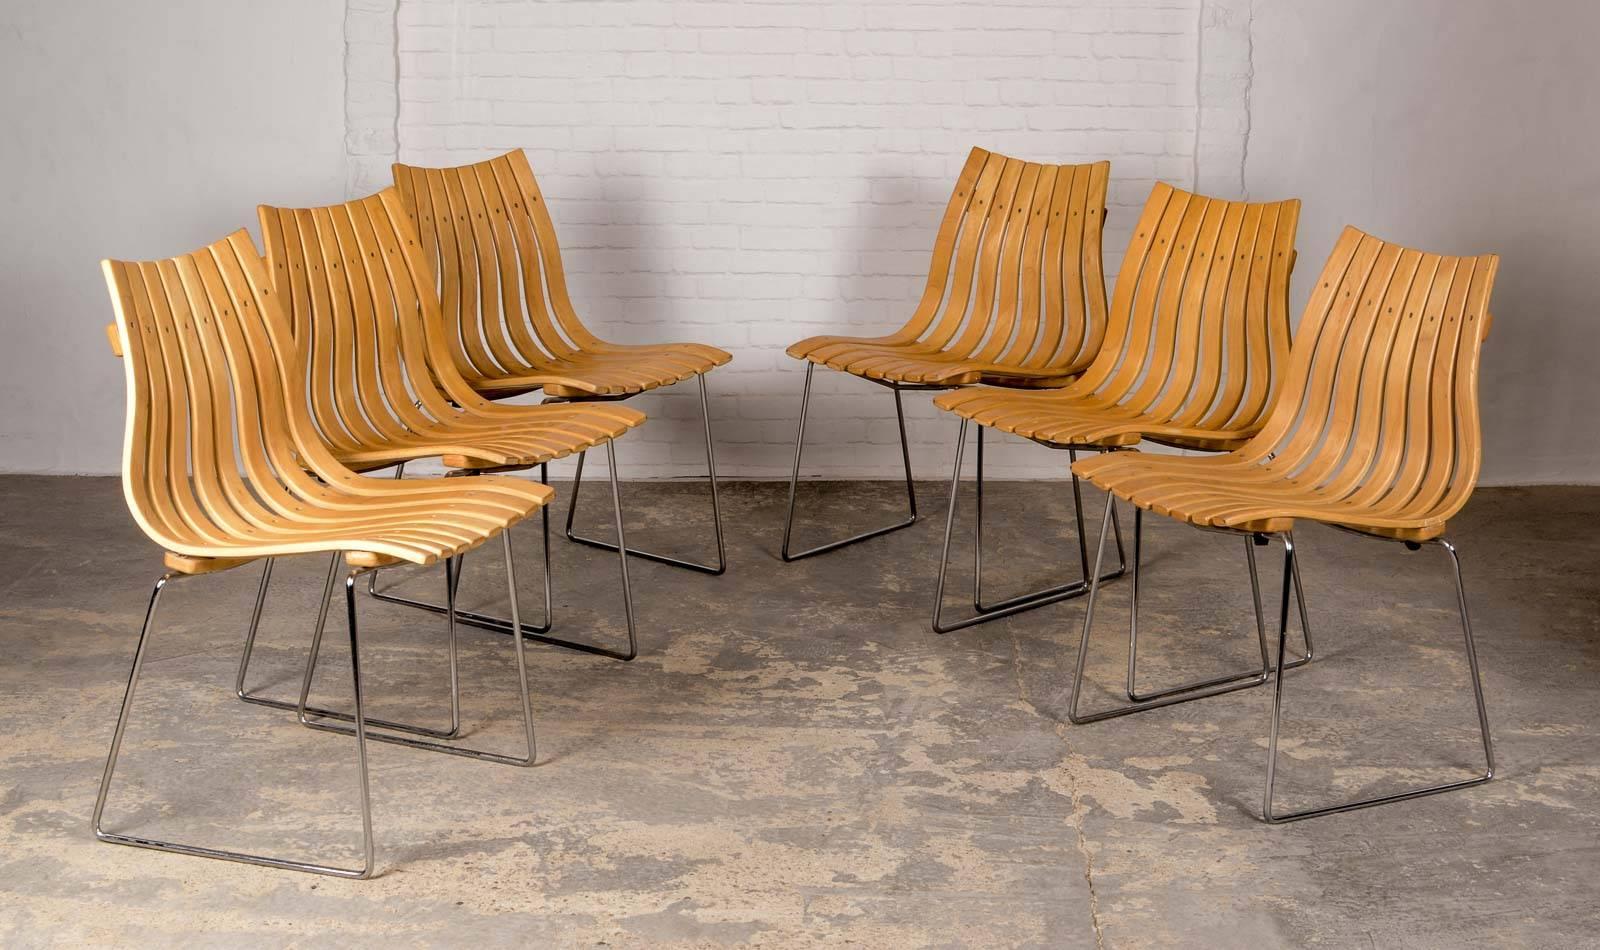 Set of six Scandia Junior dining chairs designed by Hans Brattrud for the Norwegian manufacturer Hove Mobler in 1957. The stackable chair-made of chrome steel and bended beechwood- was revolutionary, which Brattrud designed as a student project in